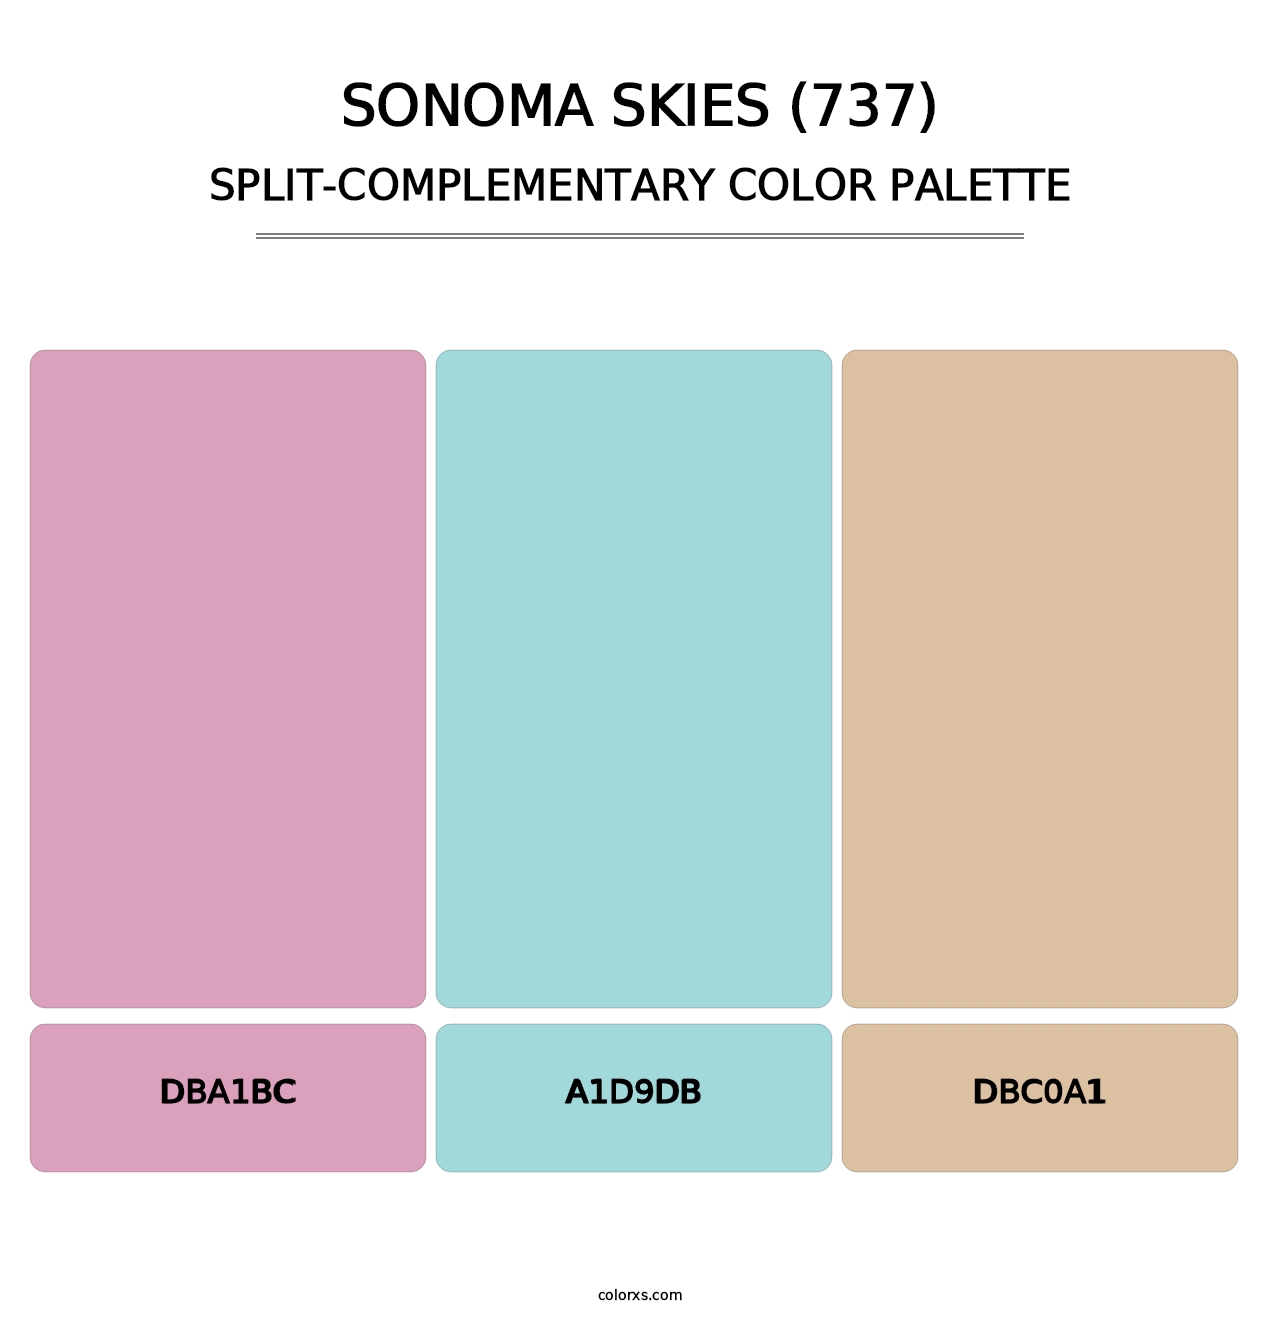 Sonoma Skies (737) - Split-Complementary Color Palette